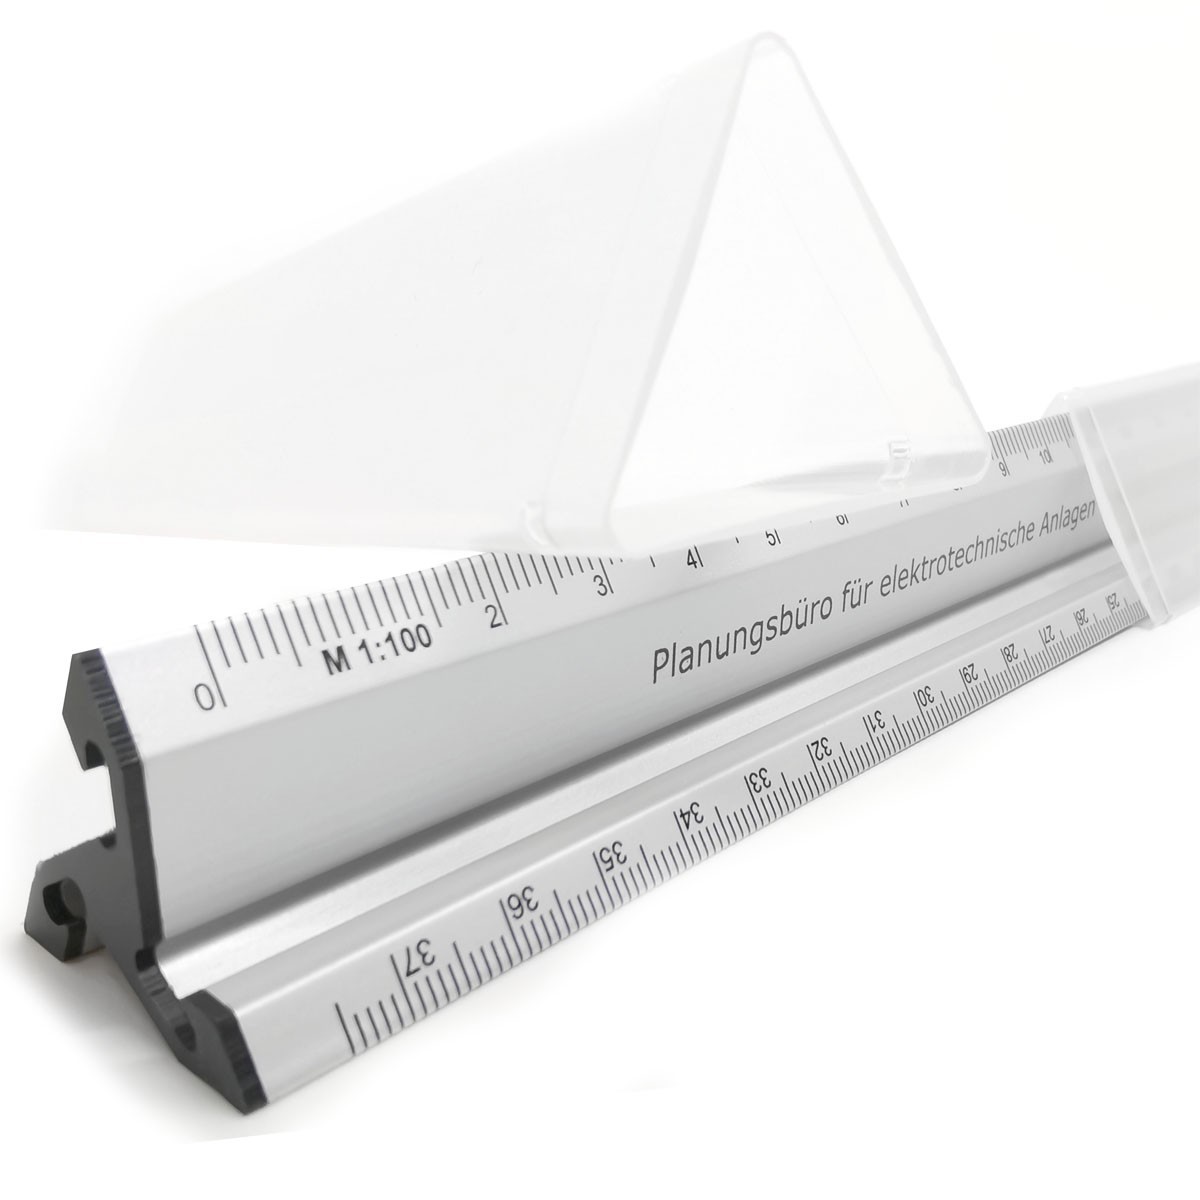 Triangular ruler with protective caps and your advertising message